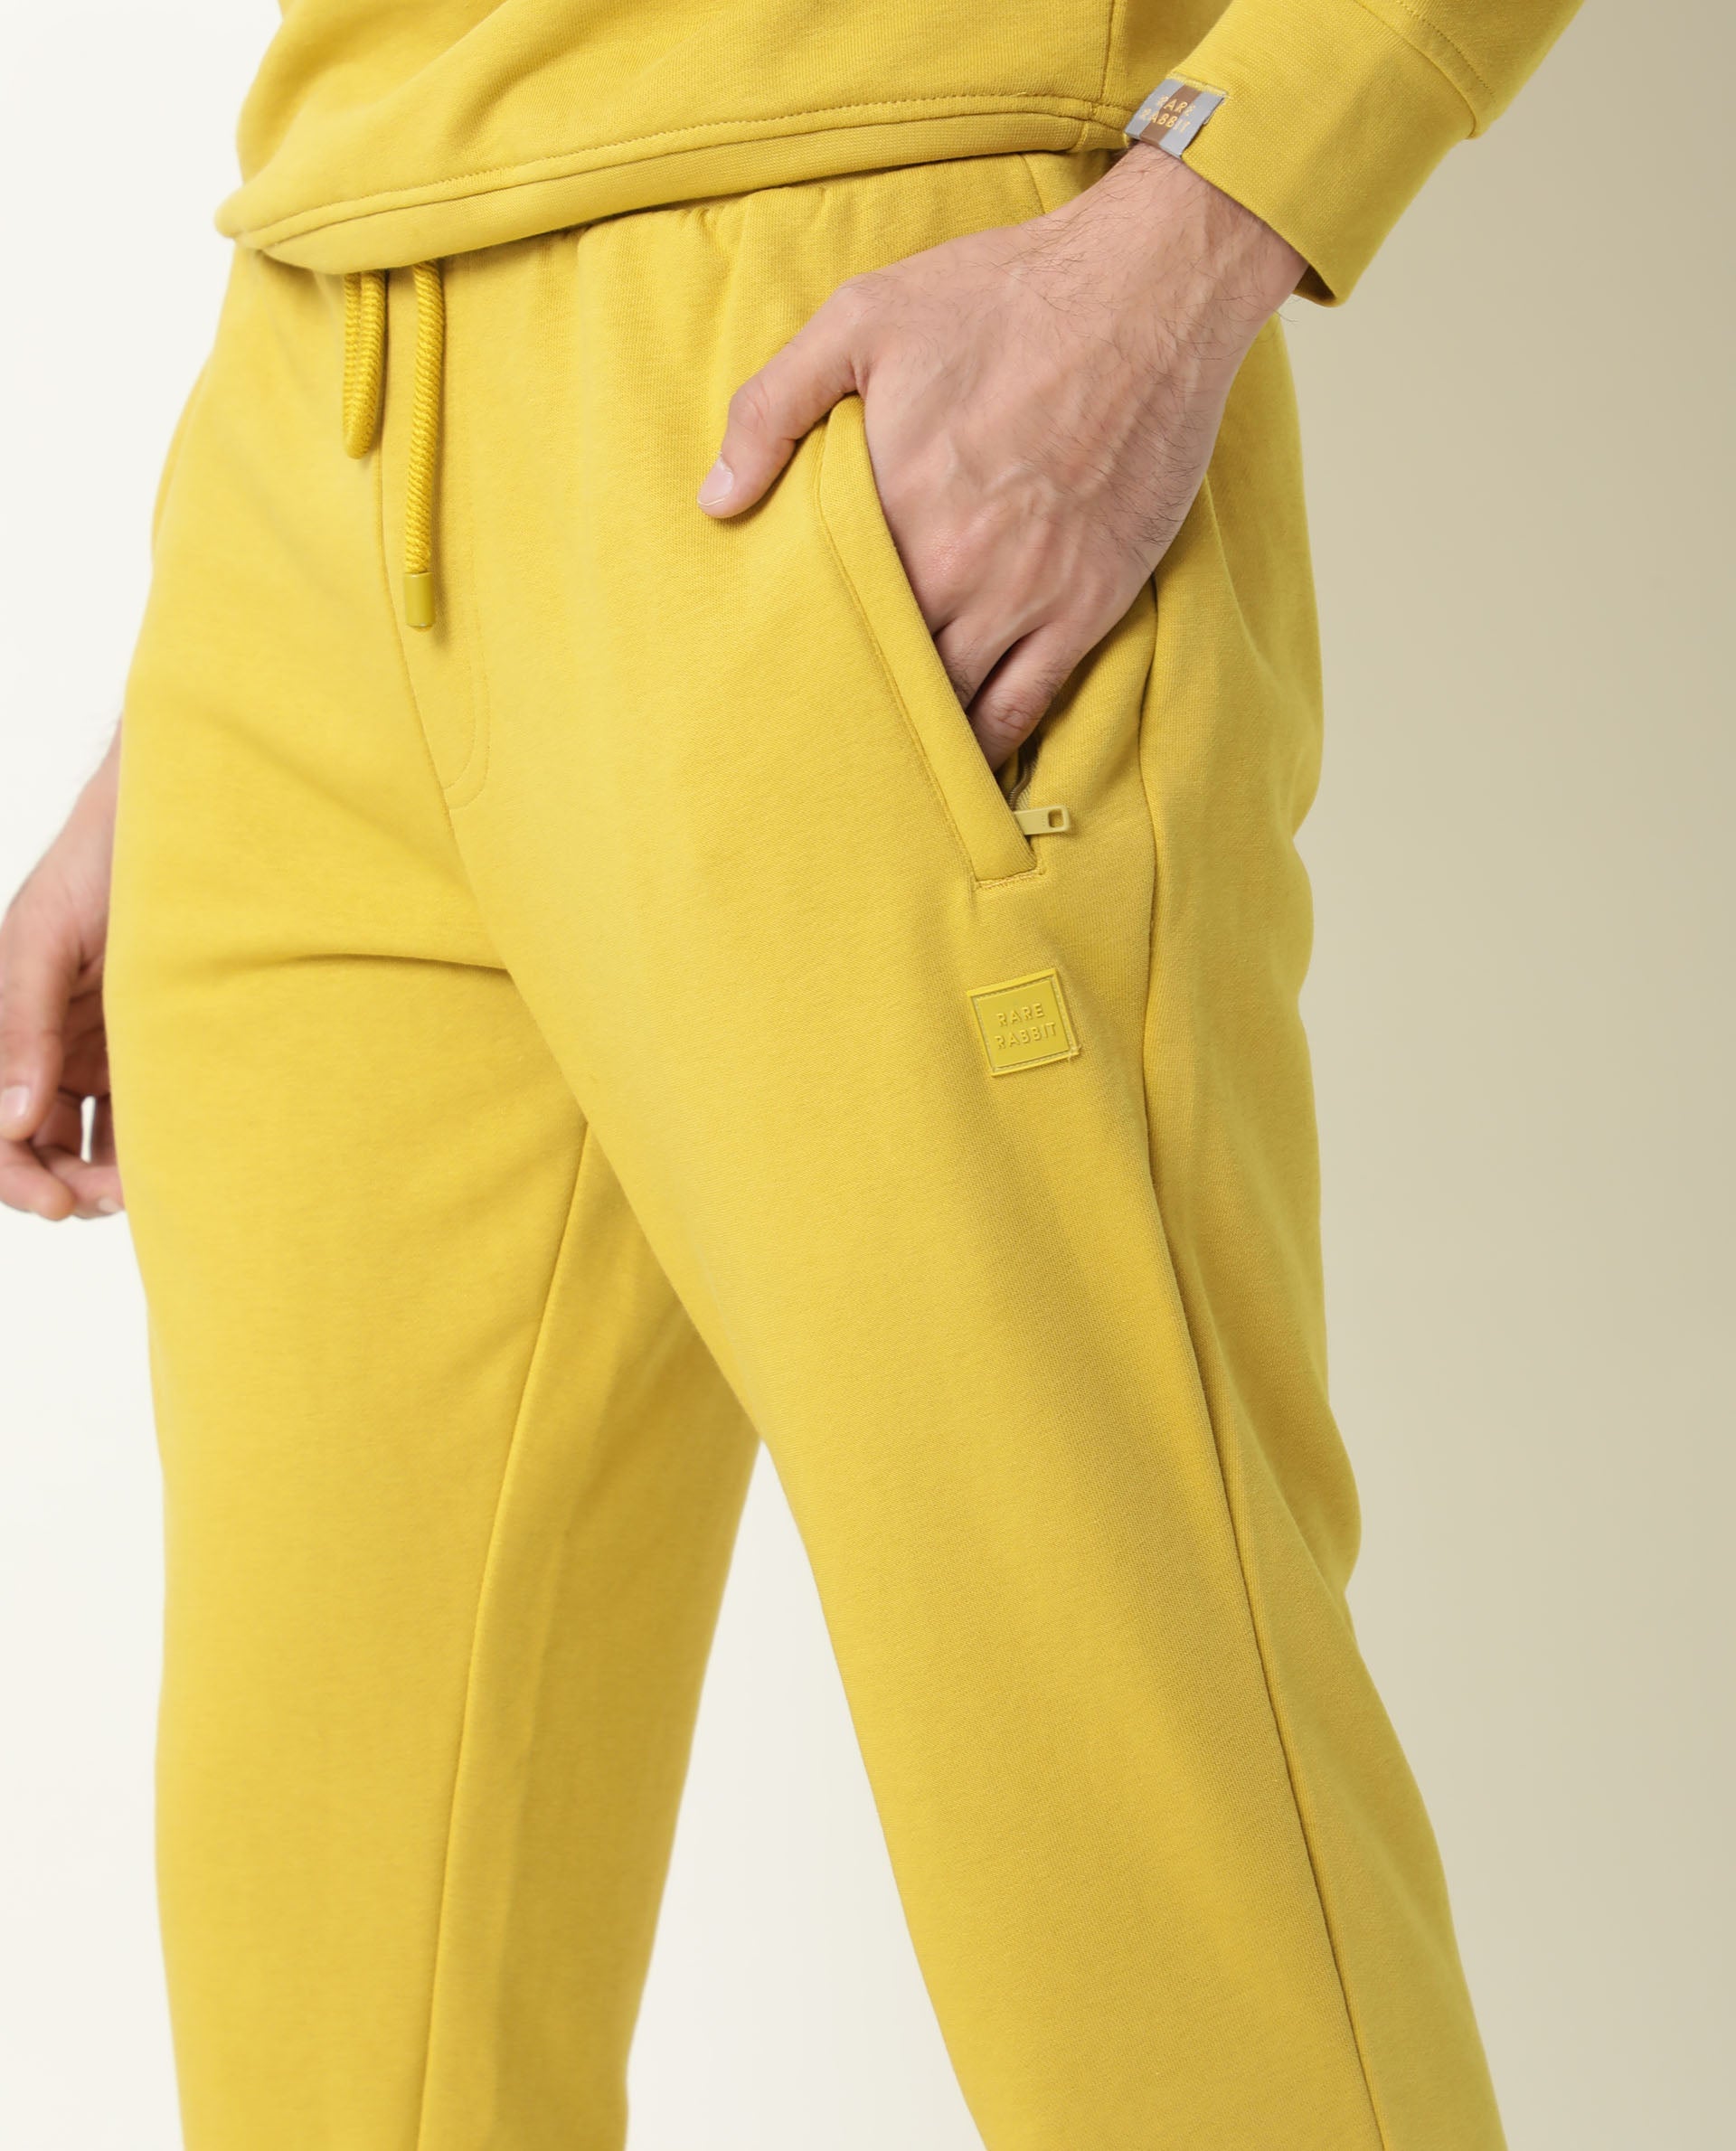 Yellow Track Pants - Buy Yellow Track Pants online in India